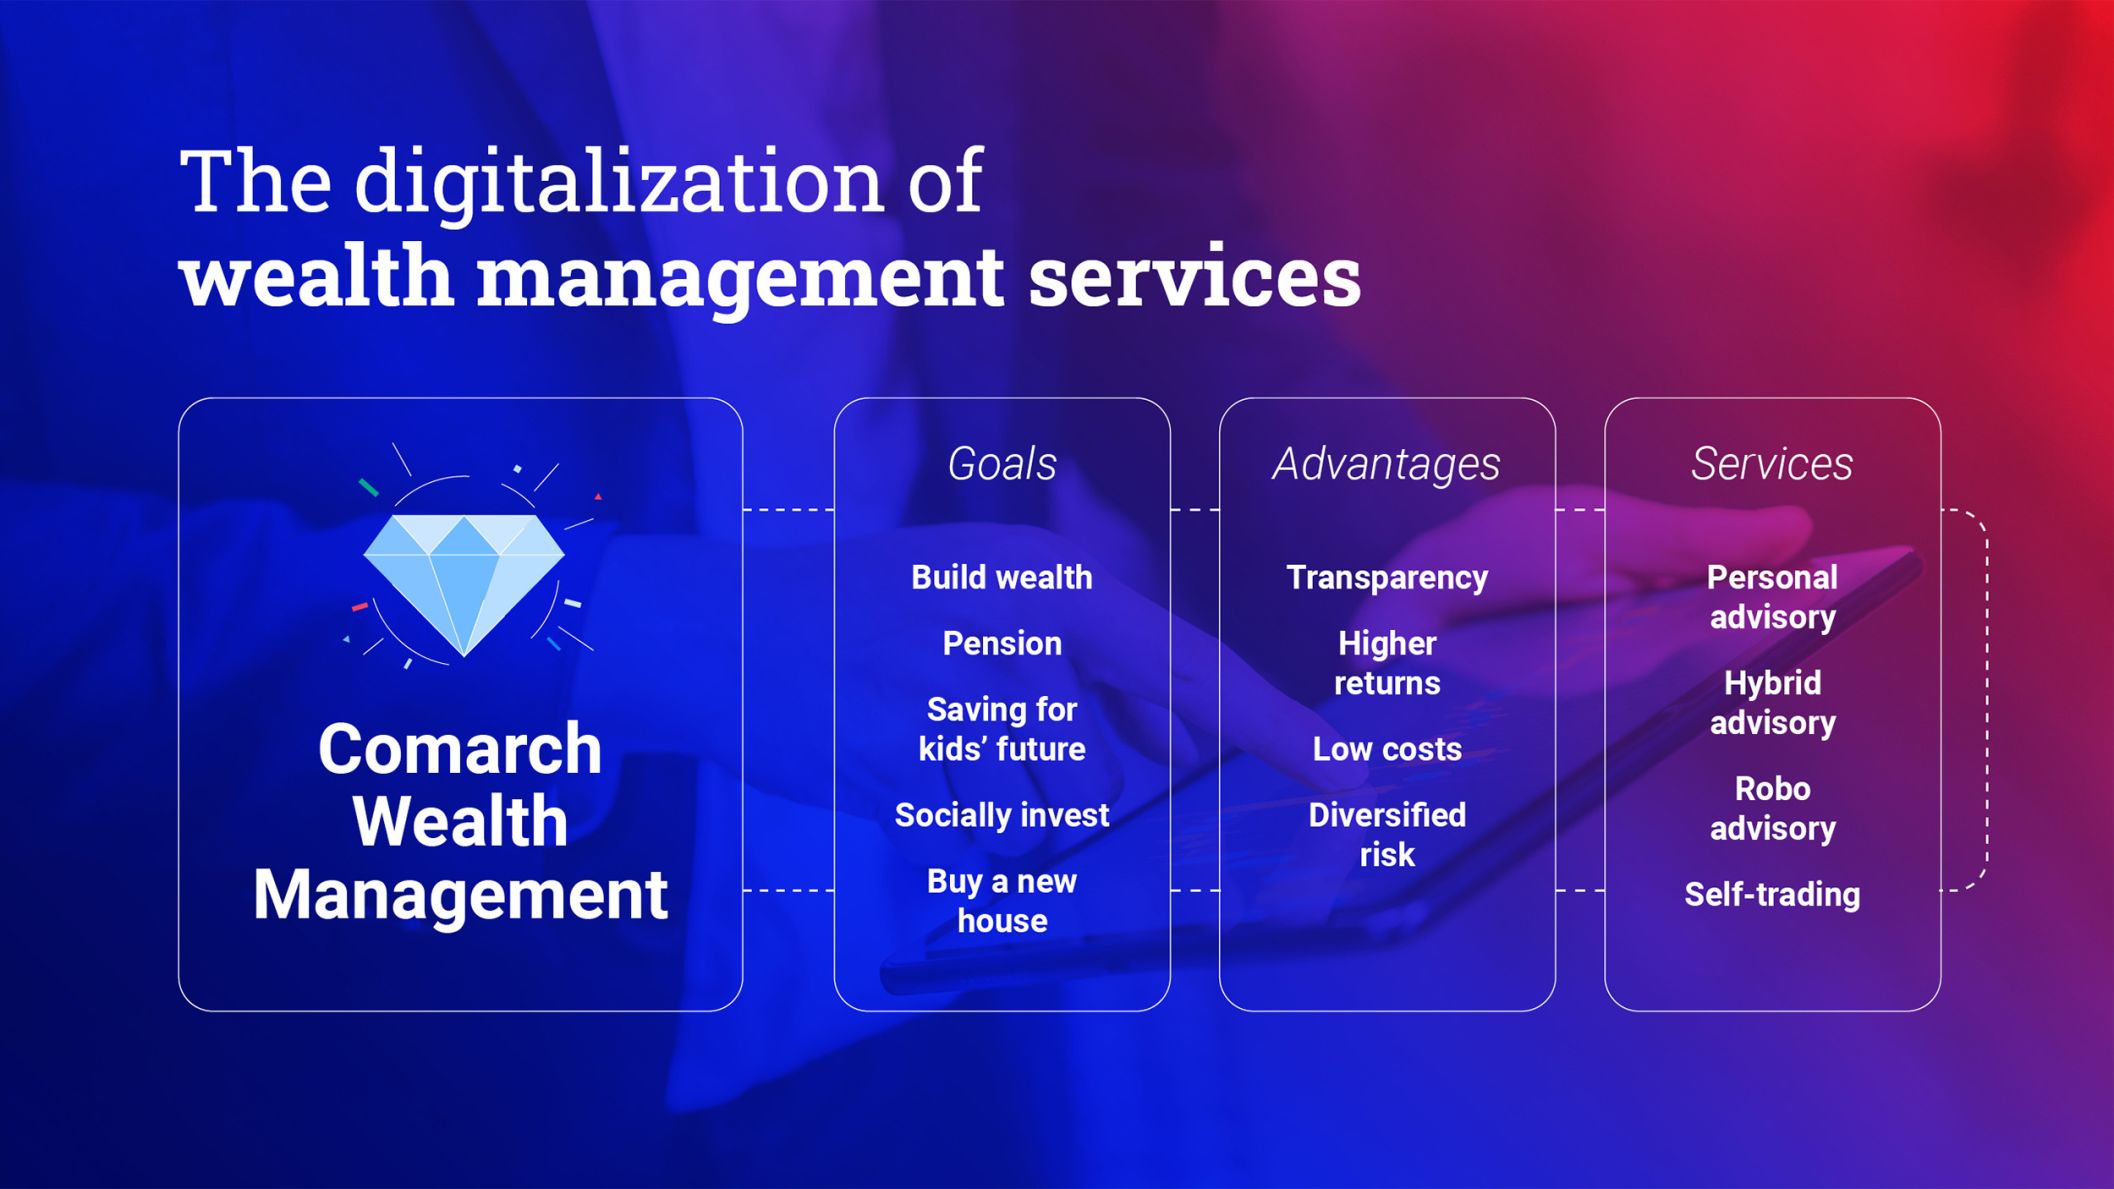 The digitalization of wealth management services